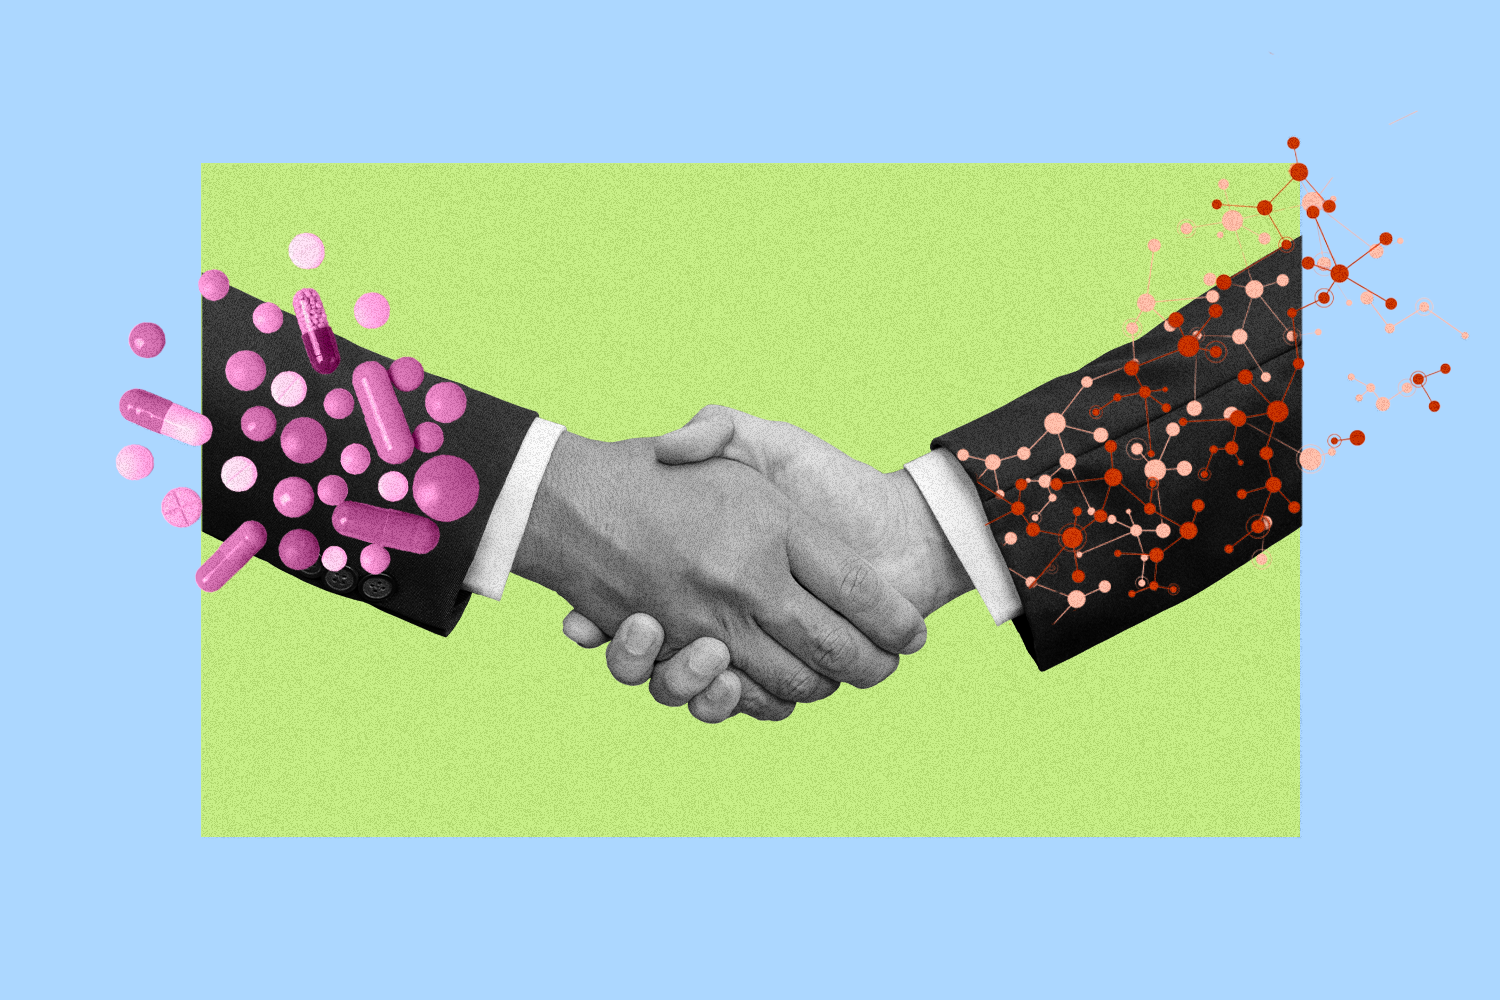 Two businessmen's arms shaking hands with pharma pills covering one hand and biotech graphics covering the other